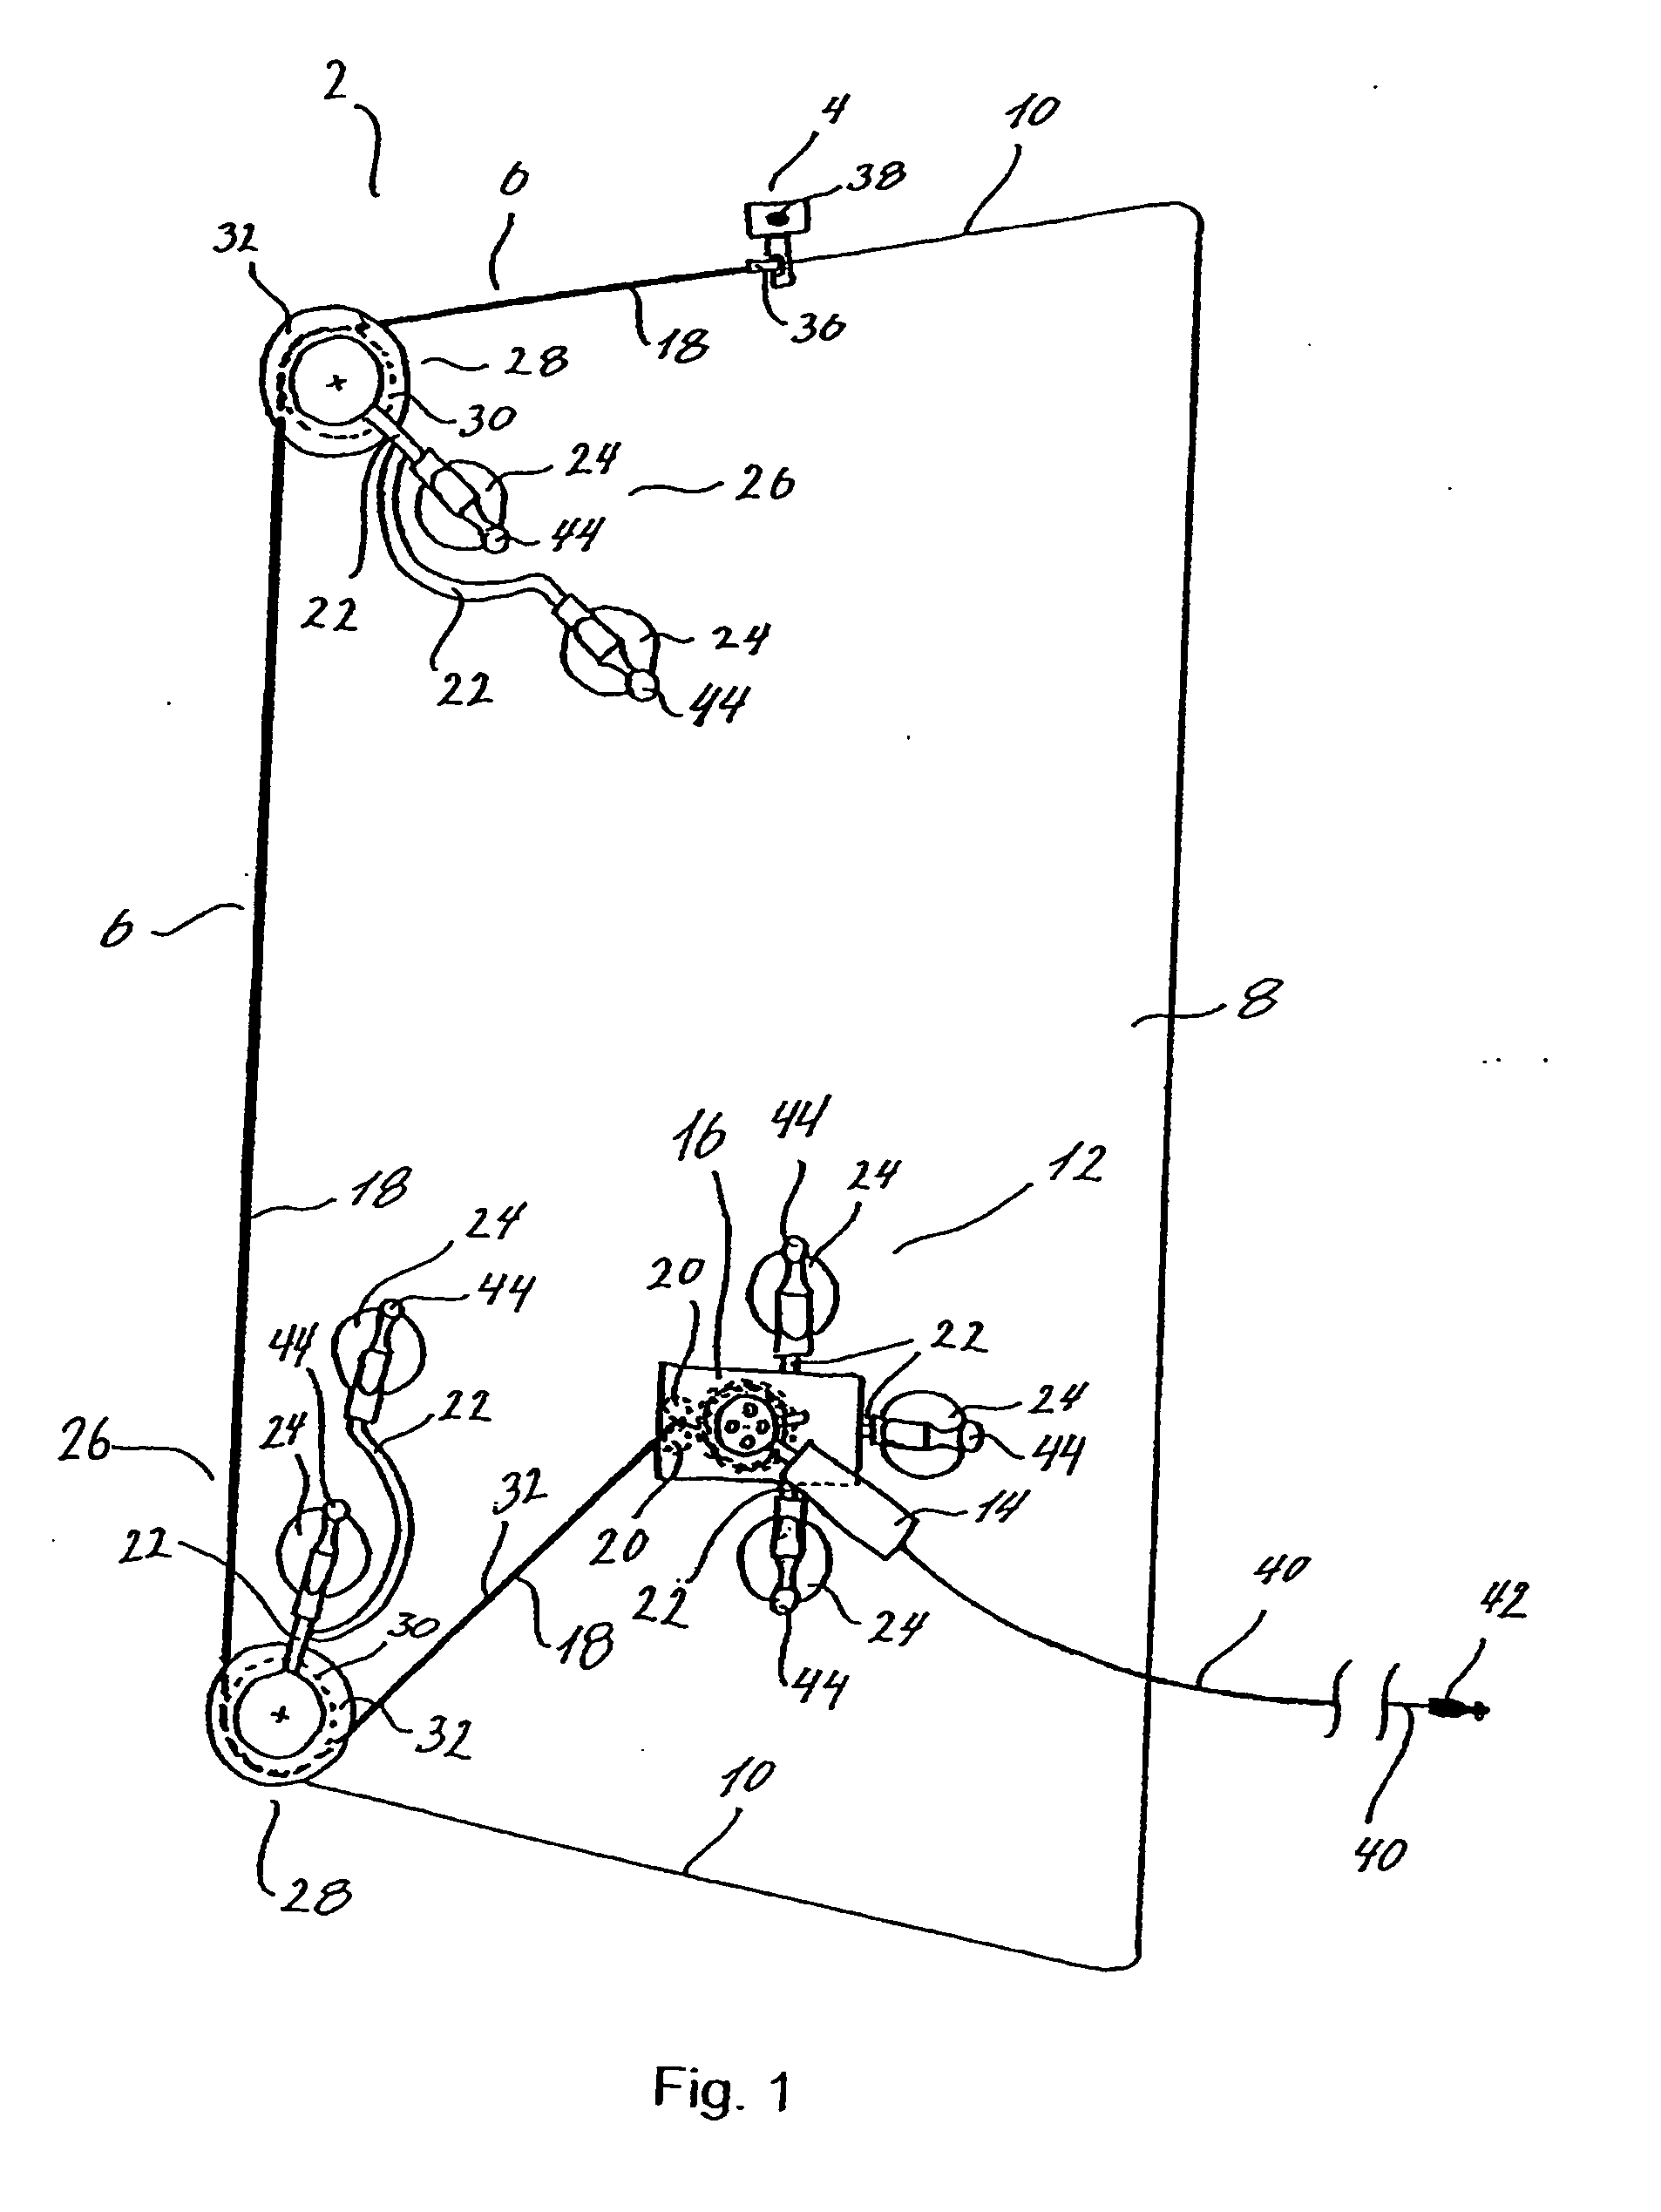 Apparatus and method for guiding a tool along a path on a surface